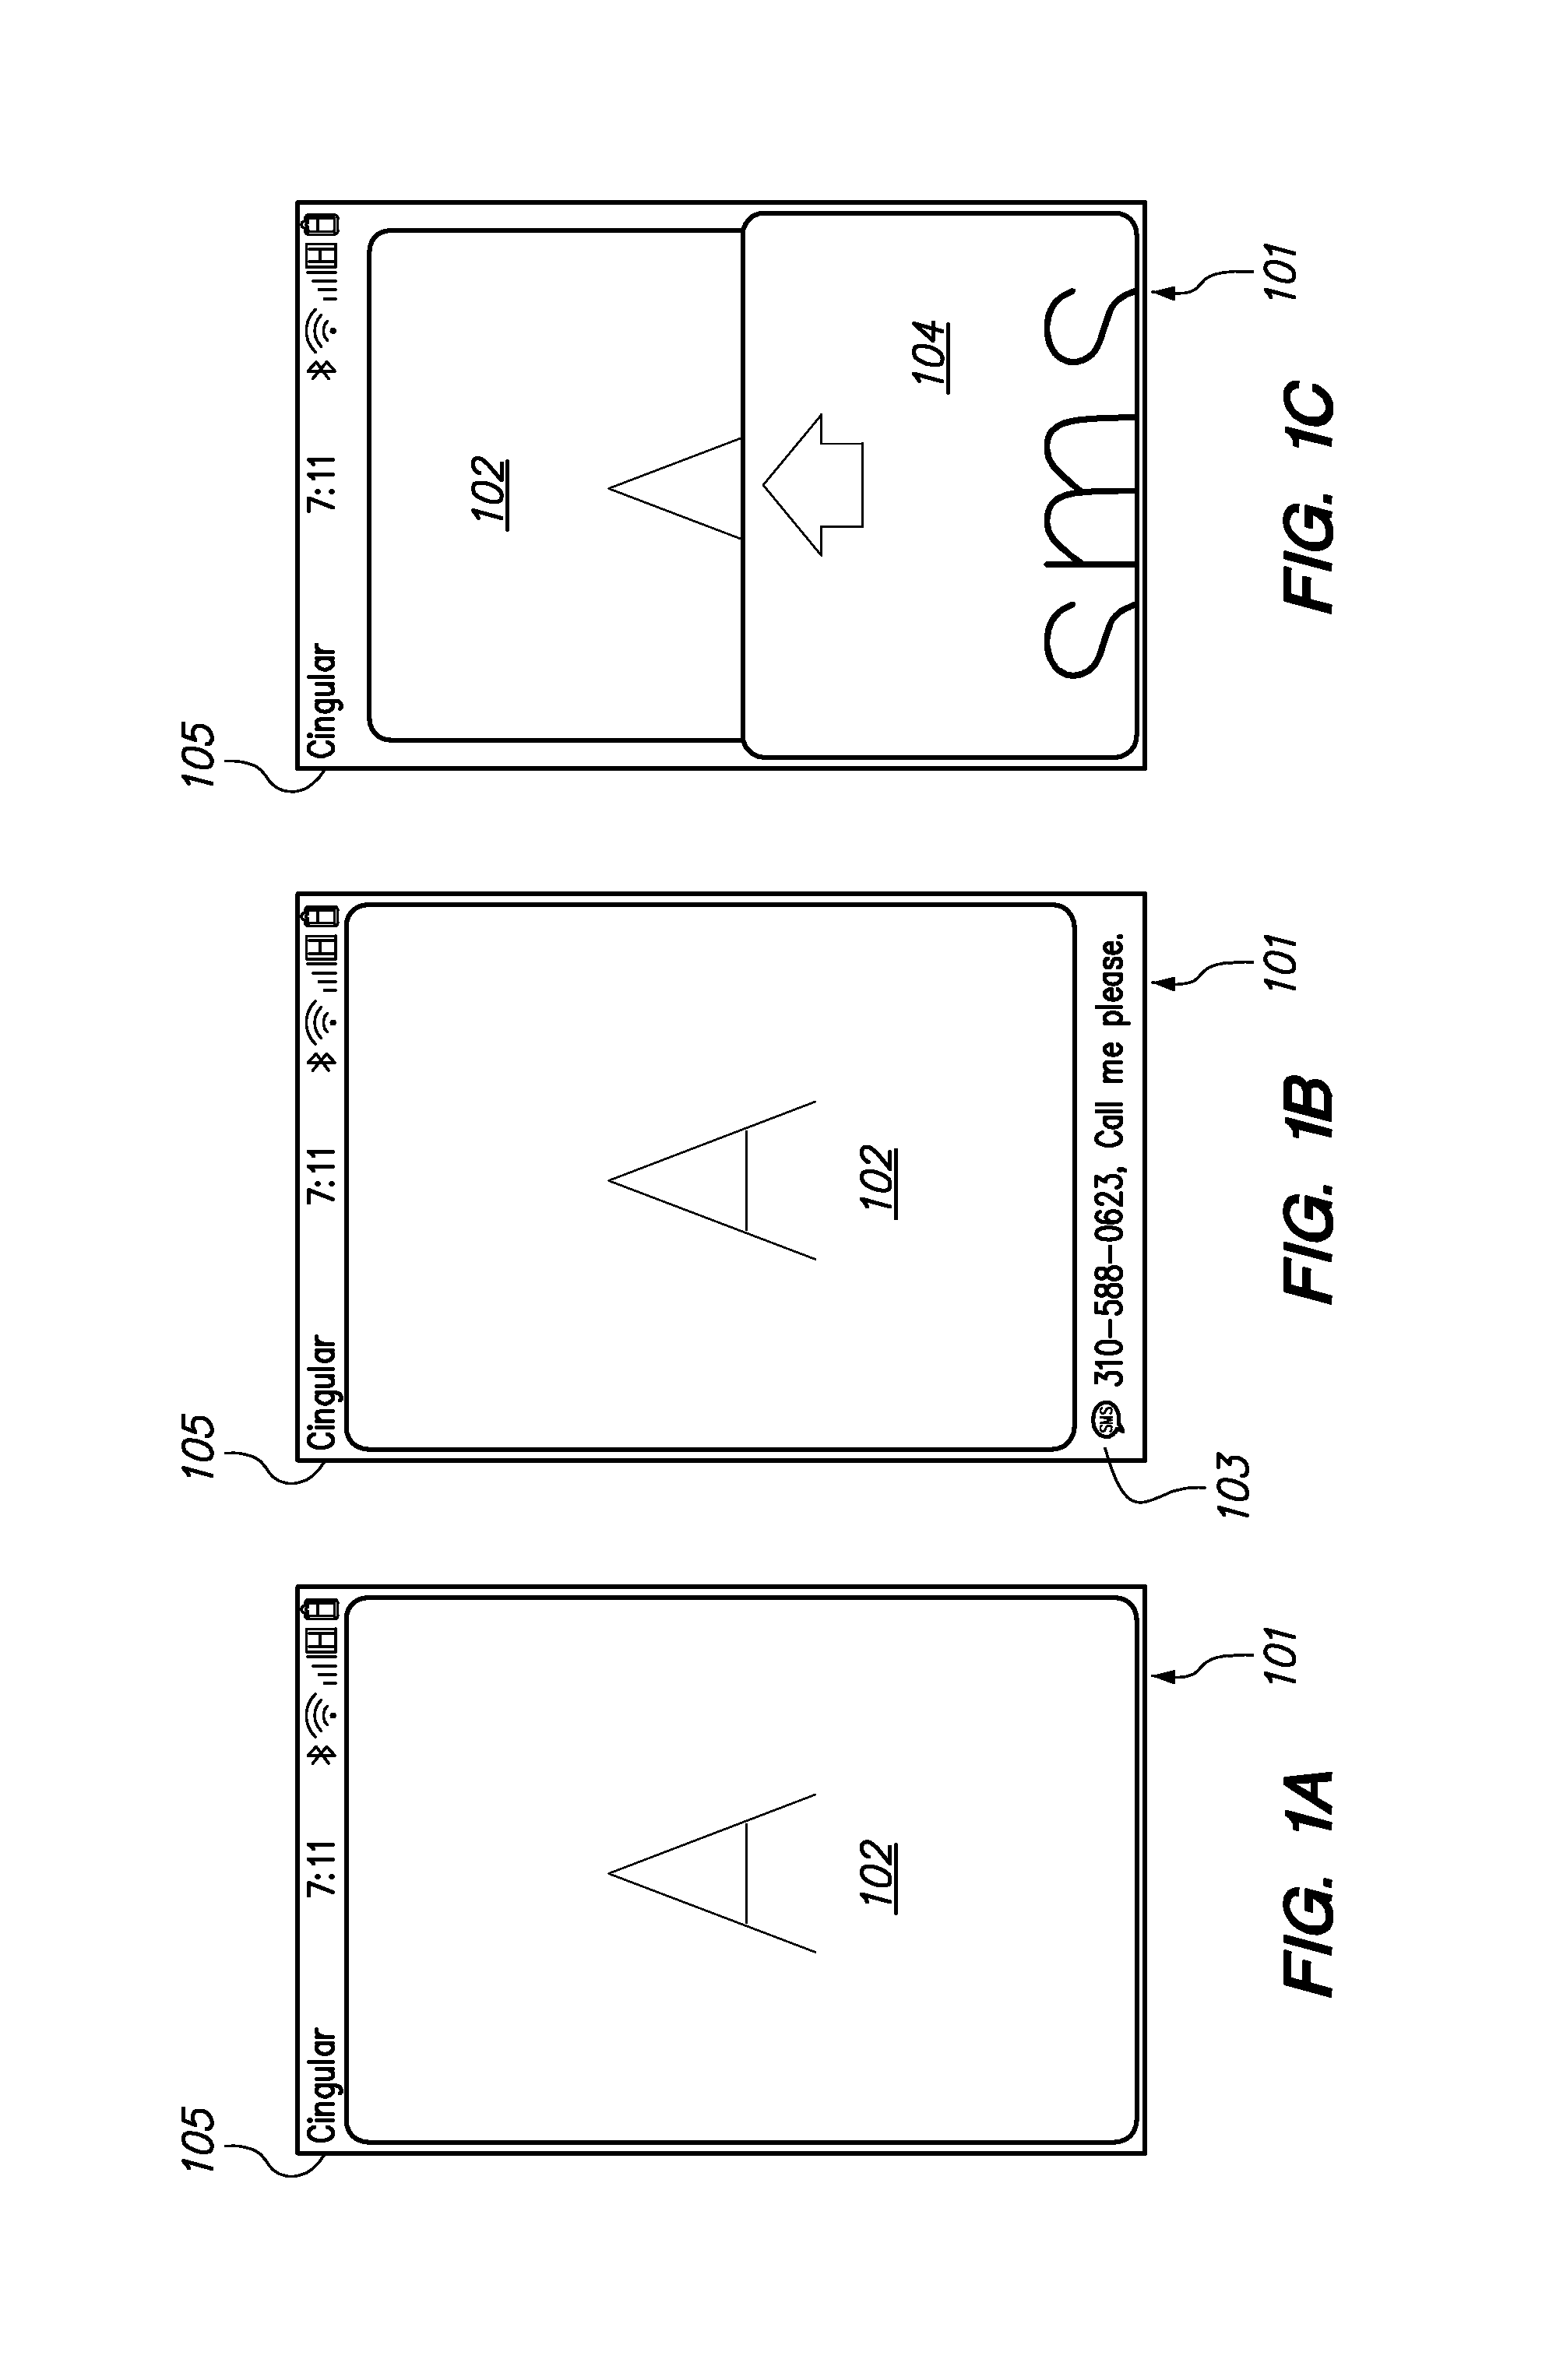 Notifying A User Of Events In A Computing Device